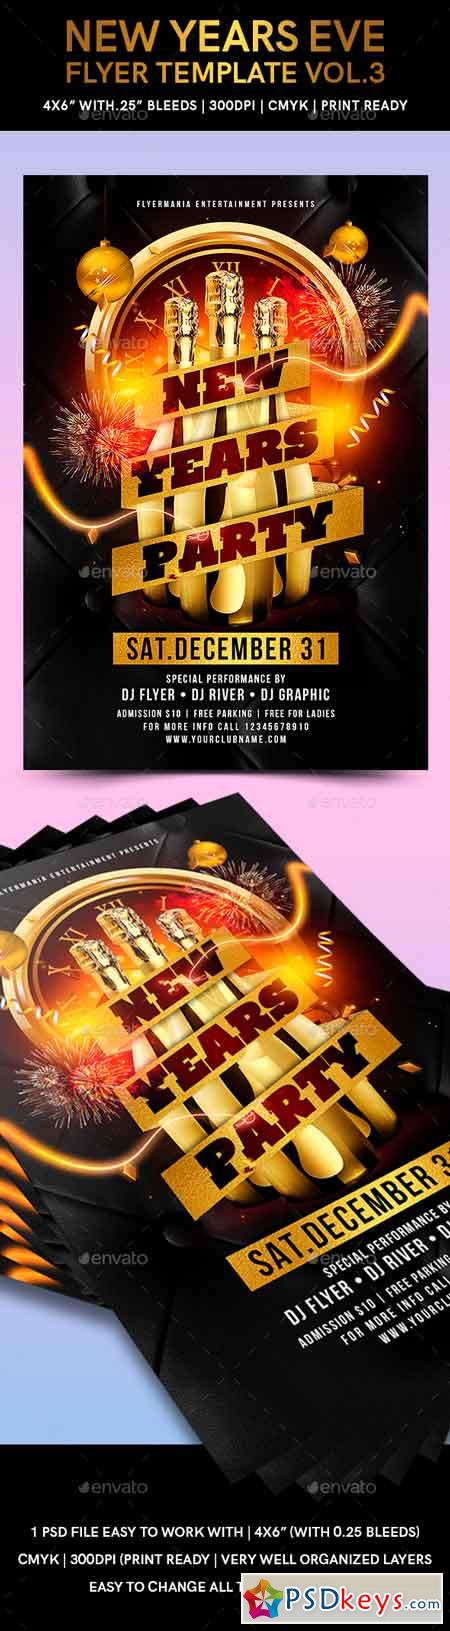 New Years Eve Flyer Template Free Download from psdkeys.com